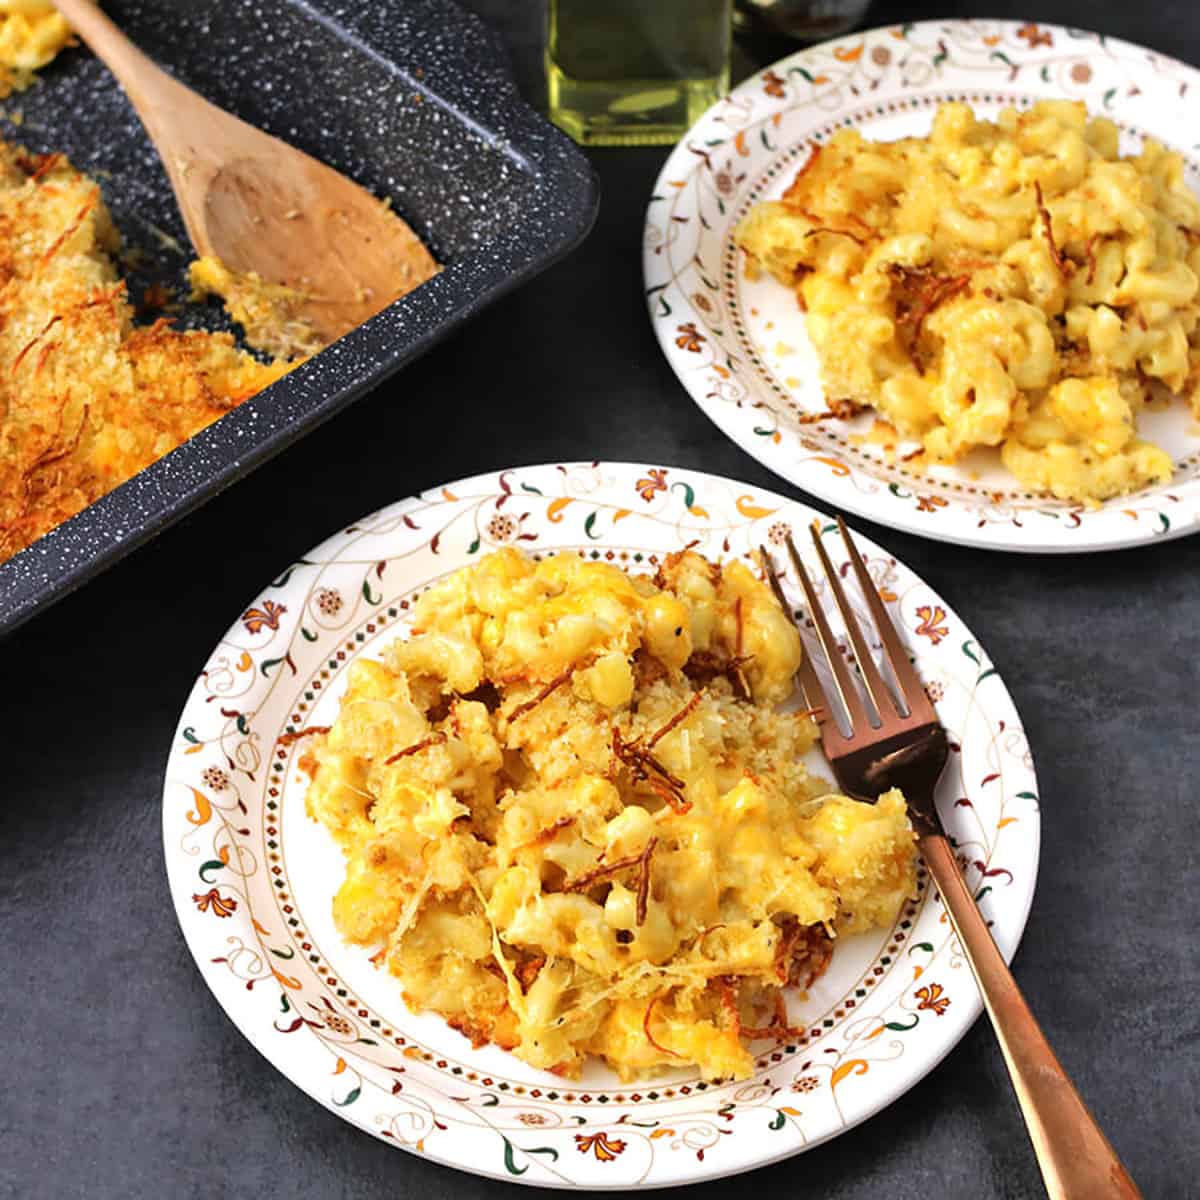 Popular American food for lunch and dinner - mac and cheese recipe with simple ingredients. 